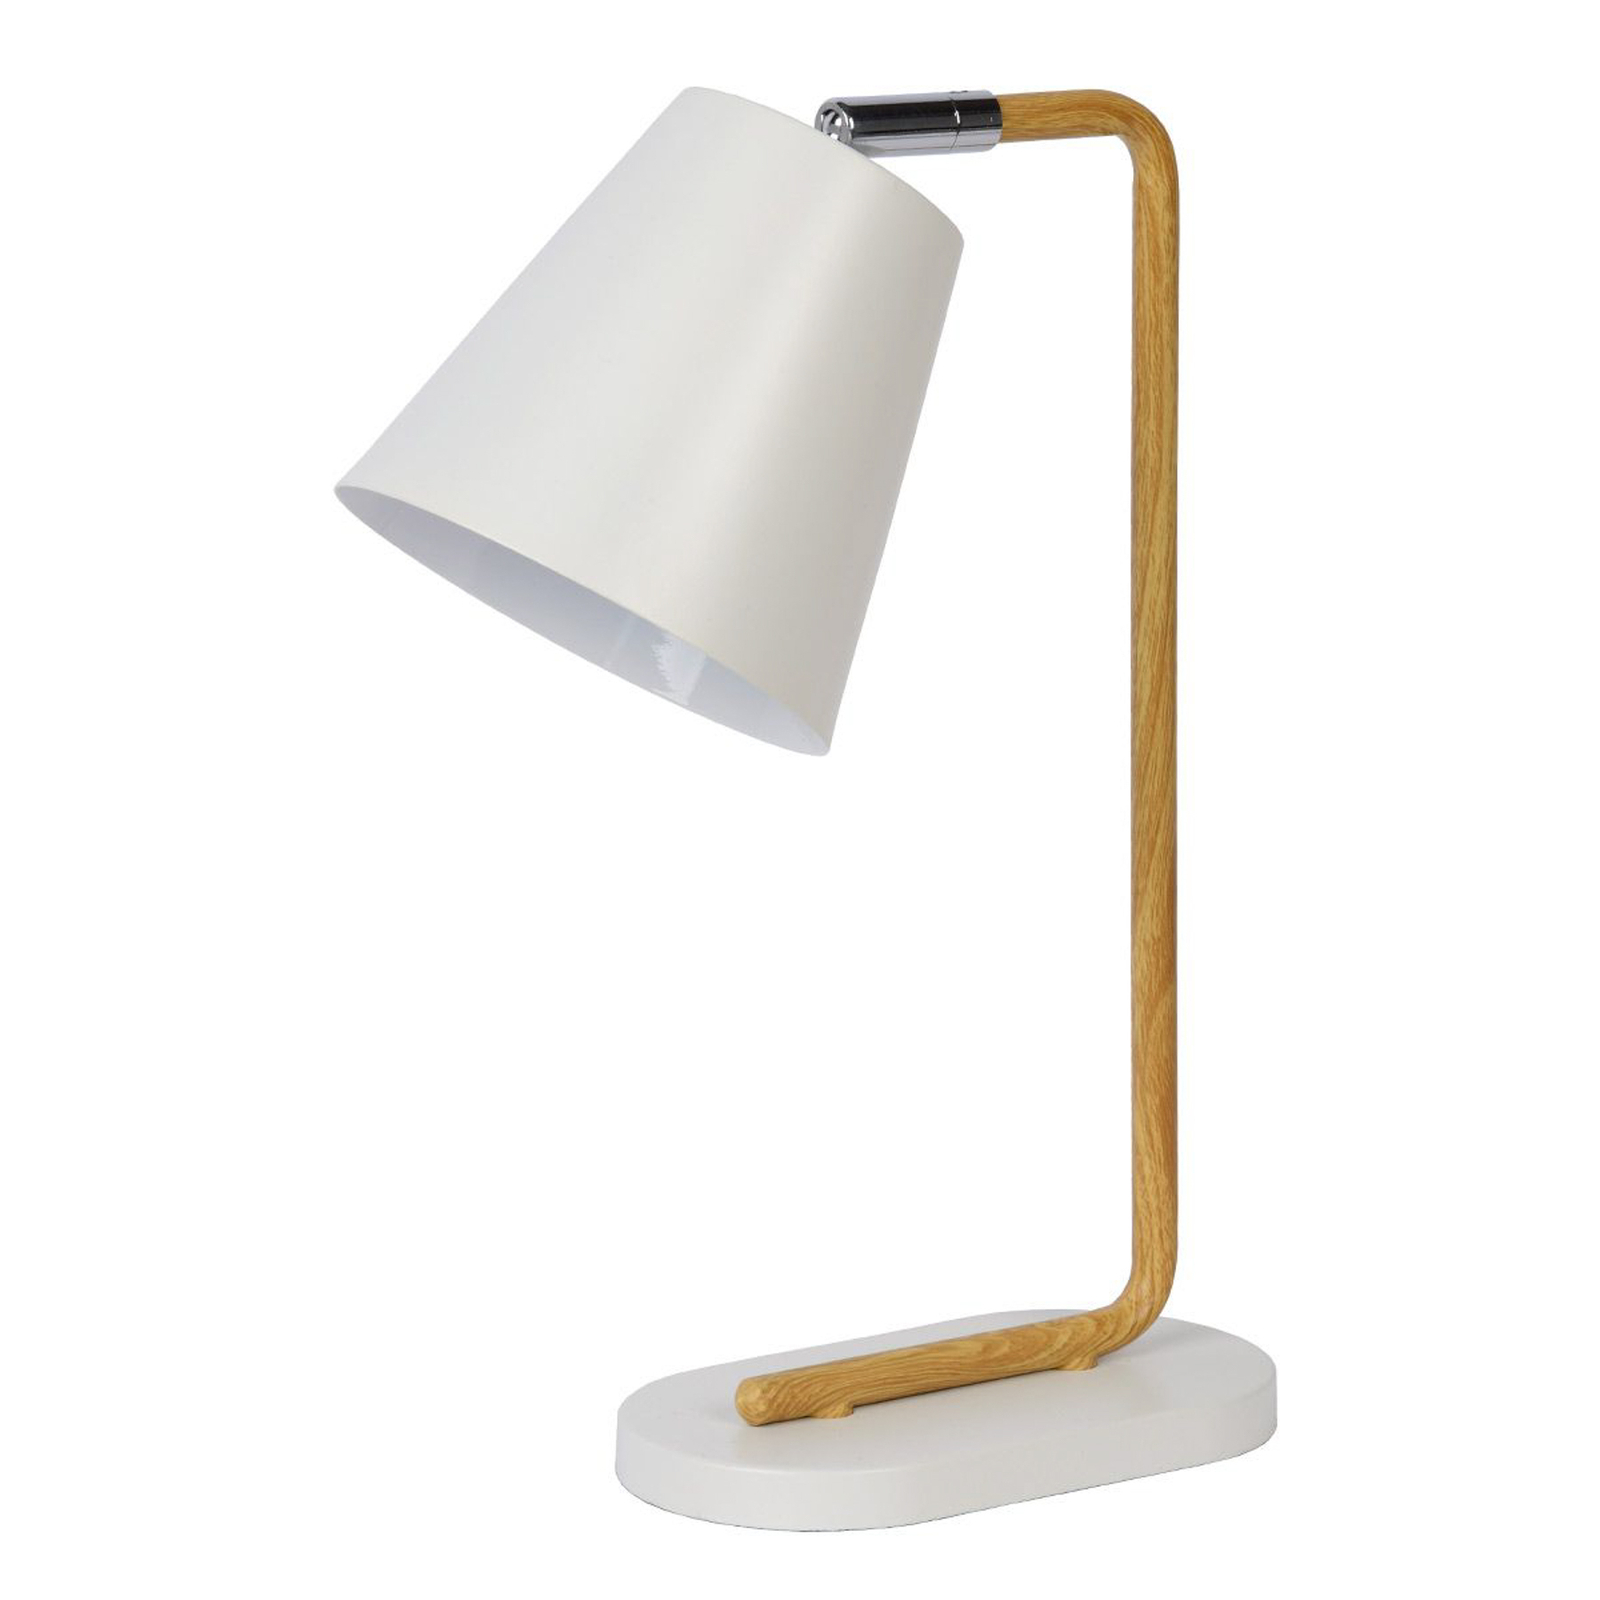 Cona - Table lamp with wood-look frame